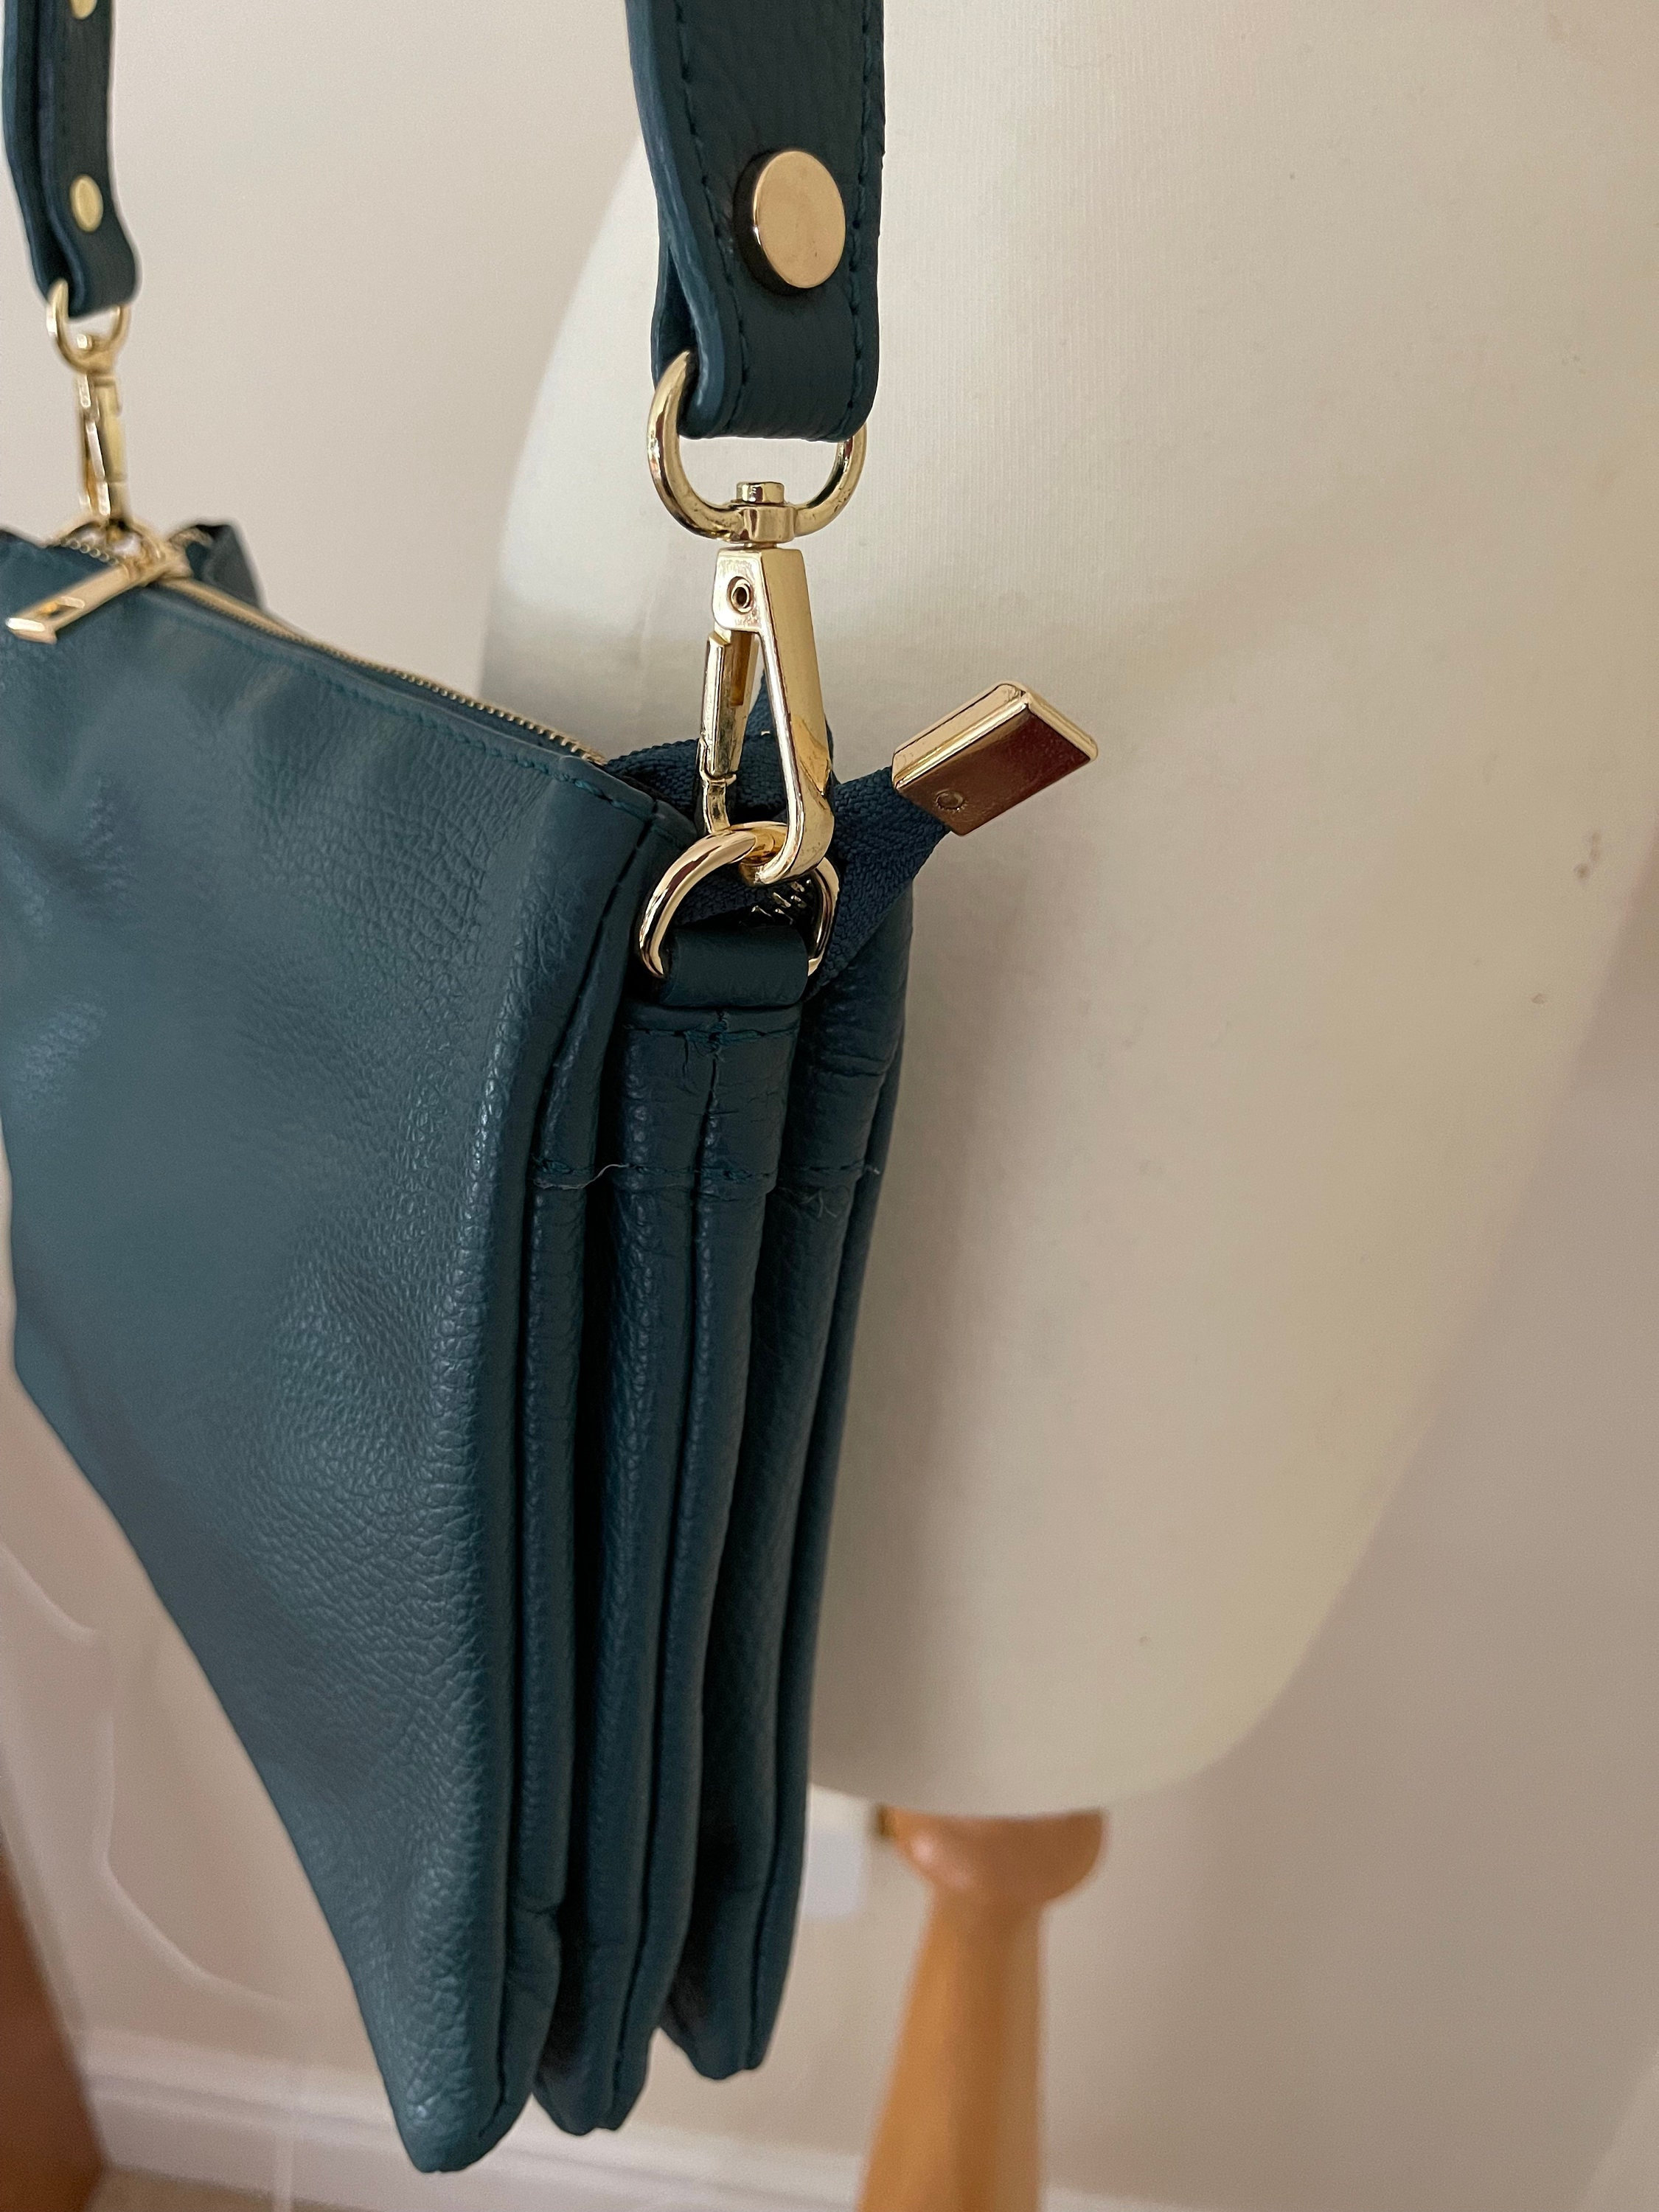 Three Compartment Shoulder Bag With Zip Fastenings Wider 